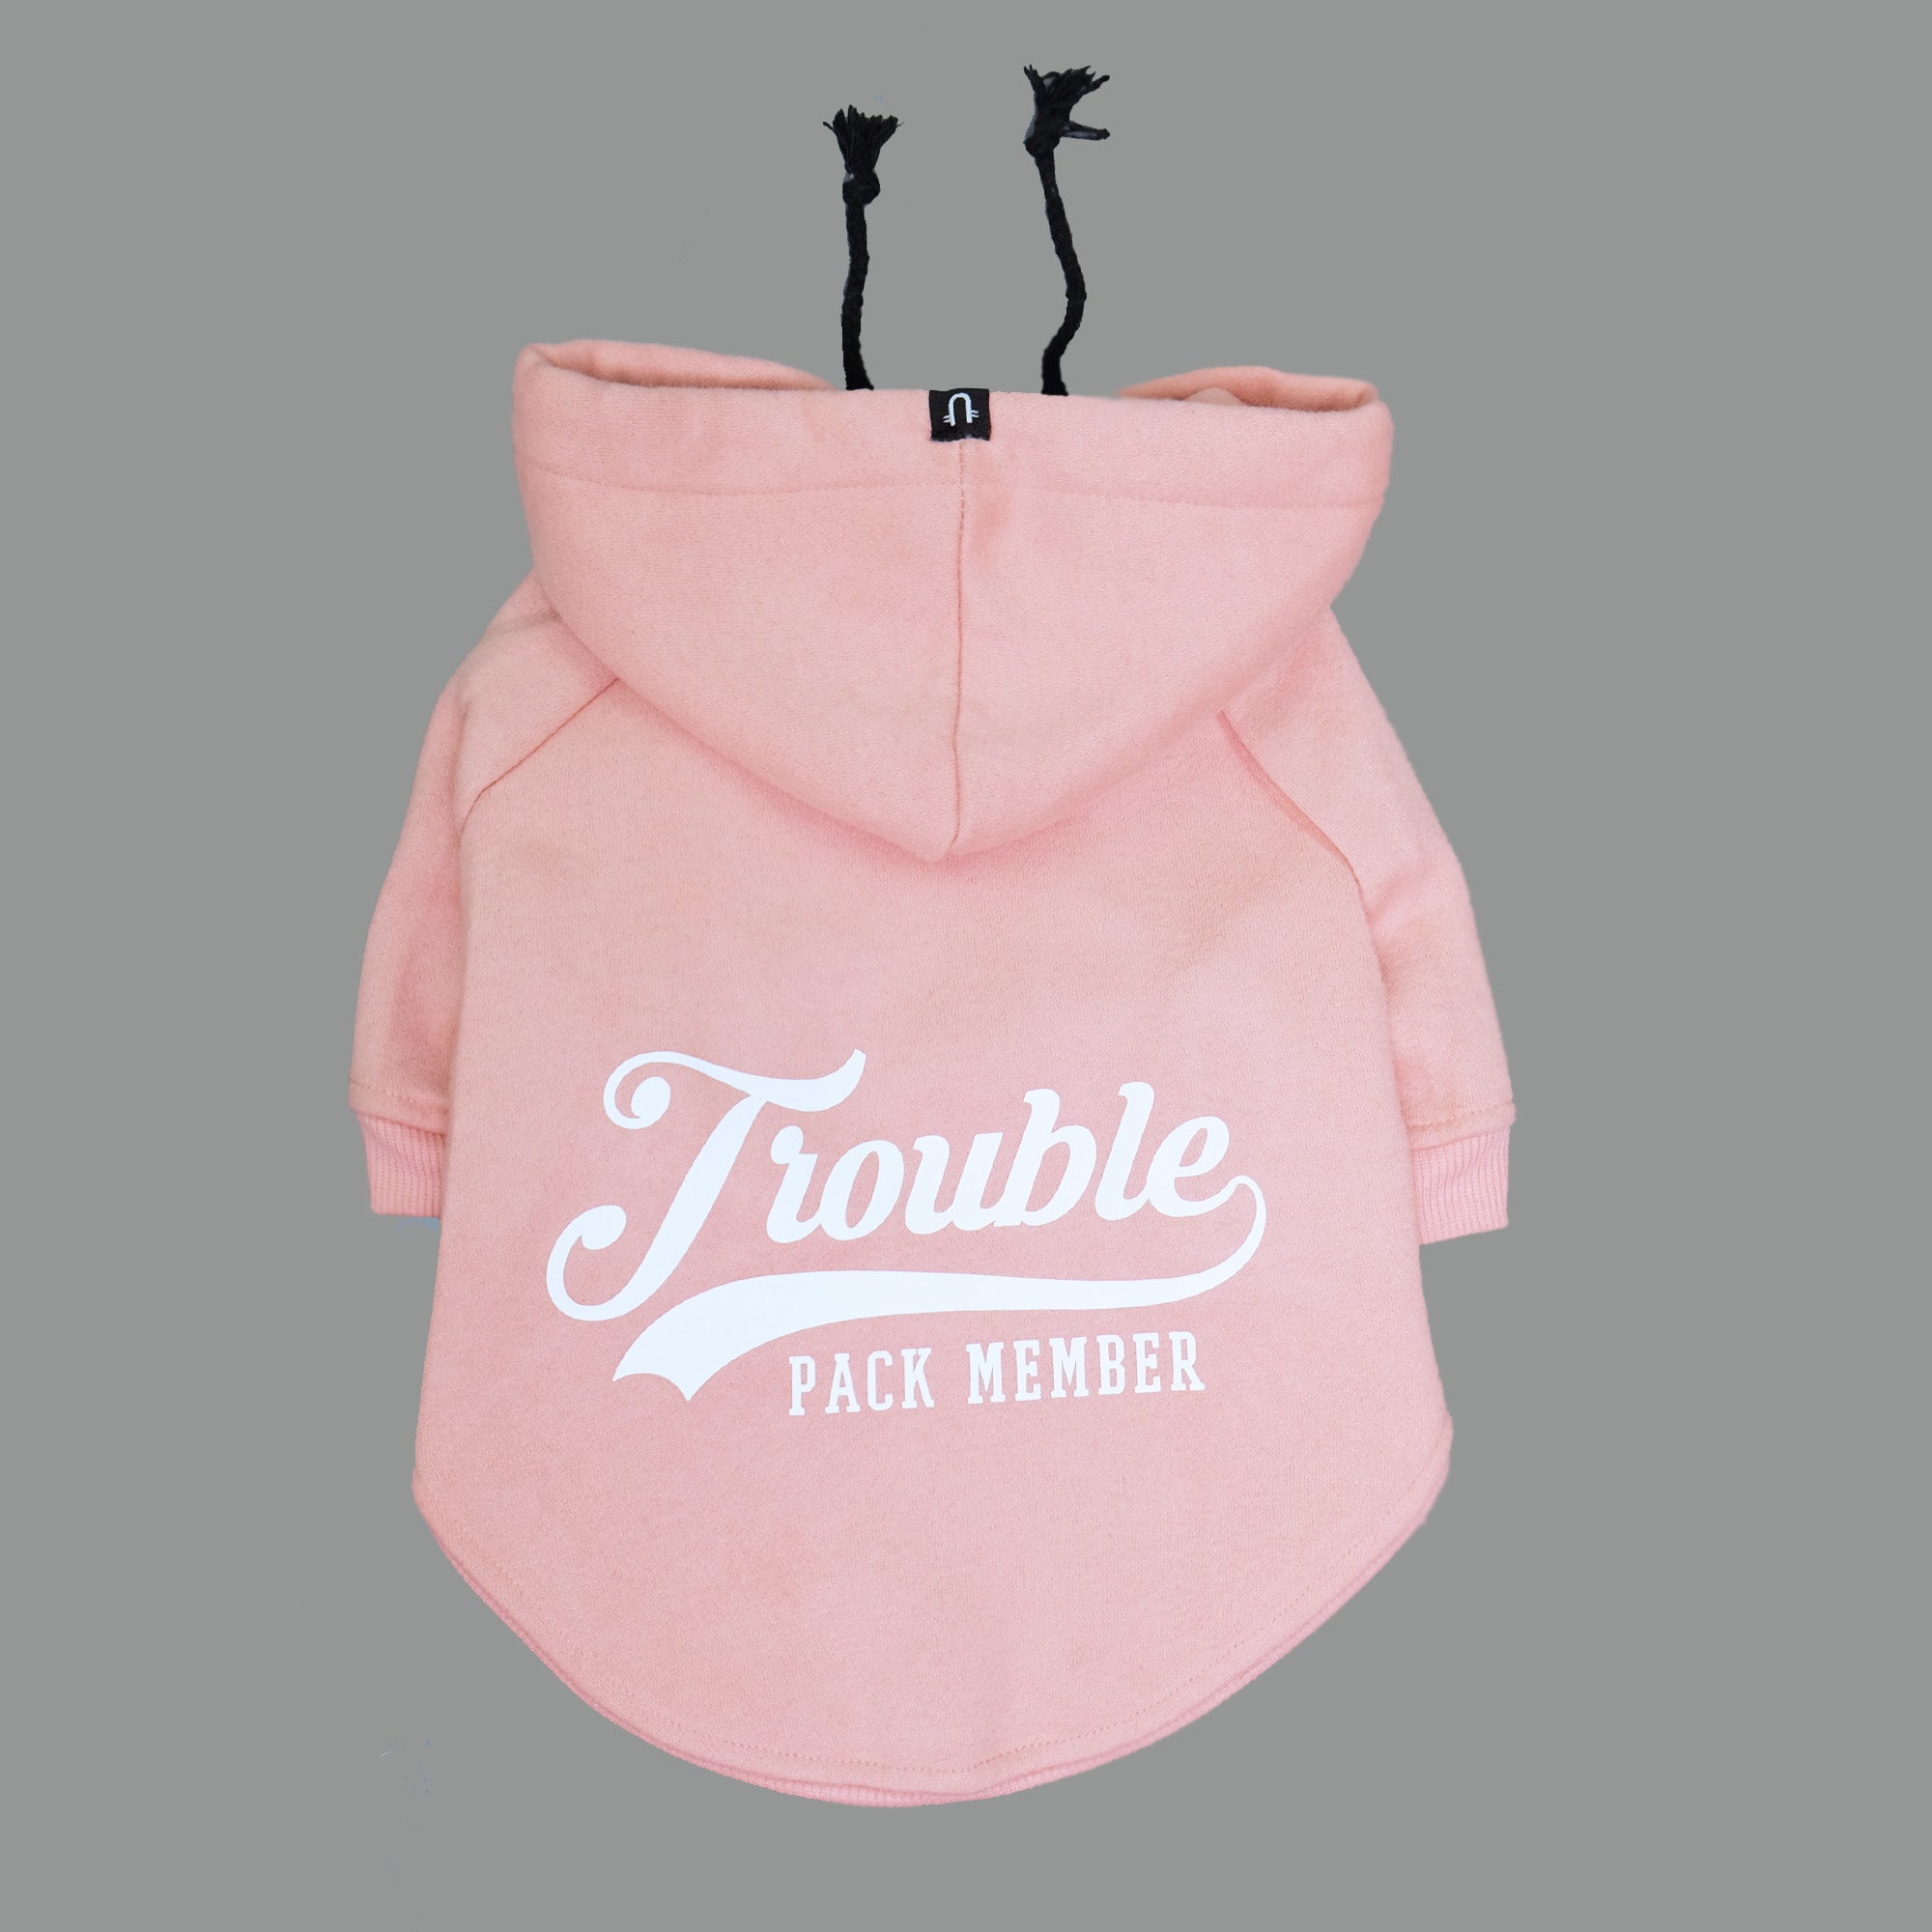 Personalised dog hoodie, the perfect dog gift, designed in Australia fits big and little dogs